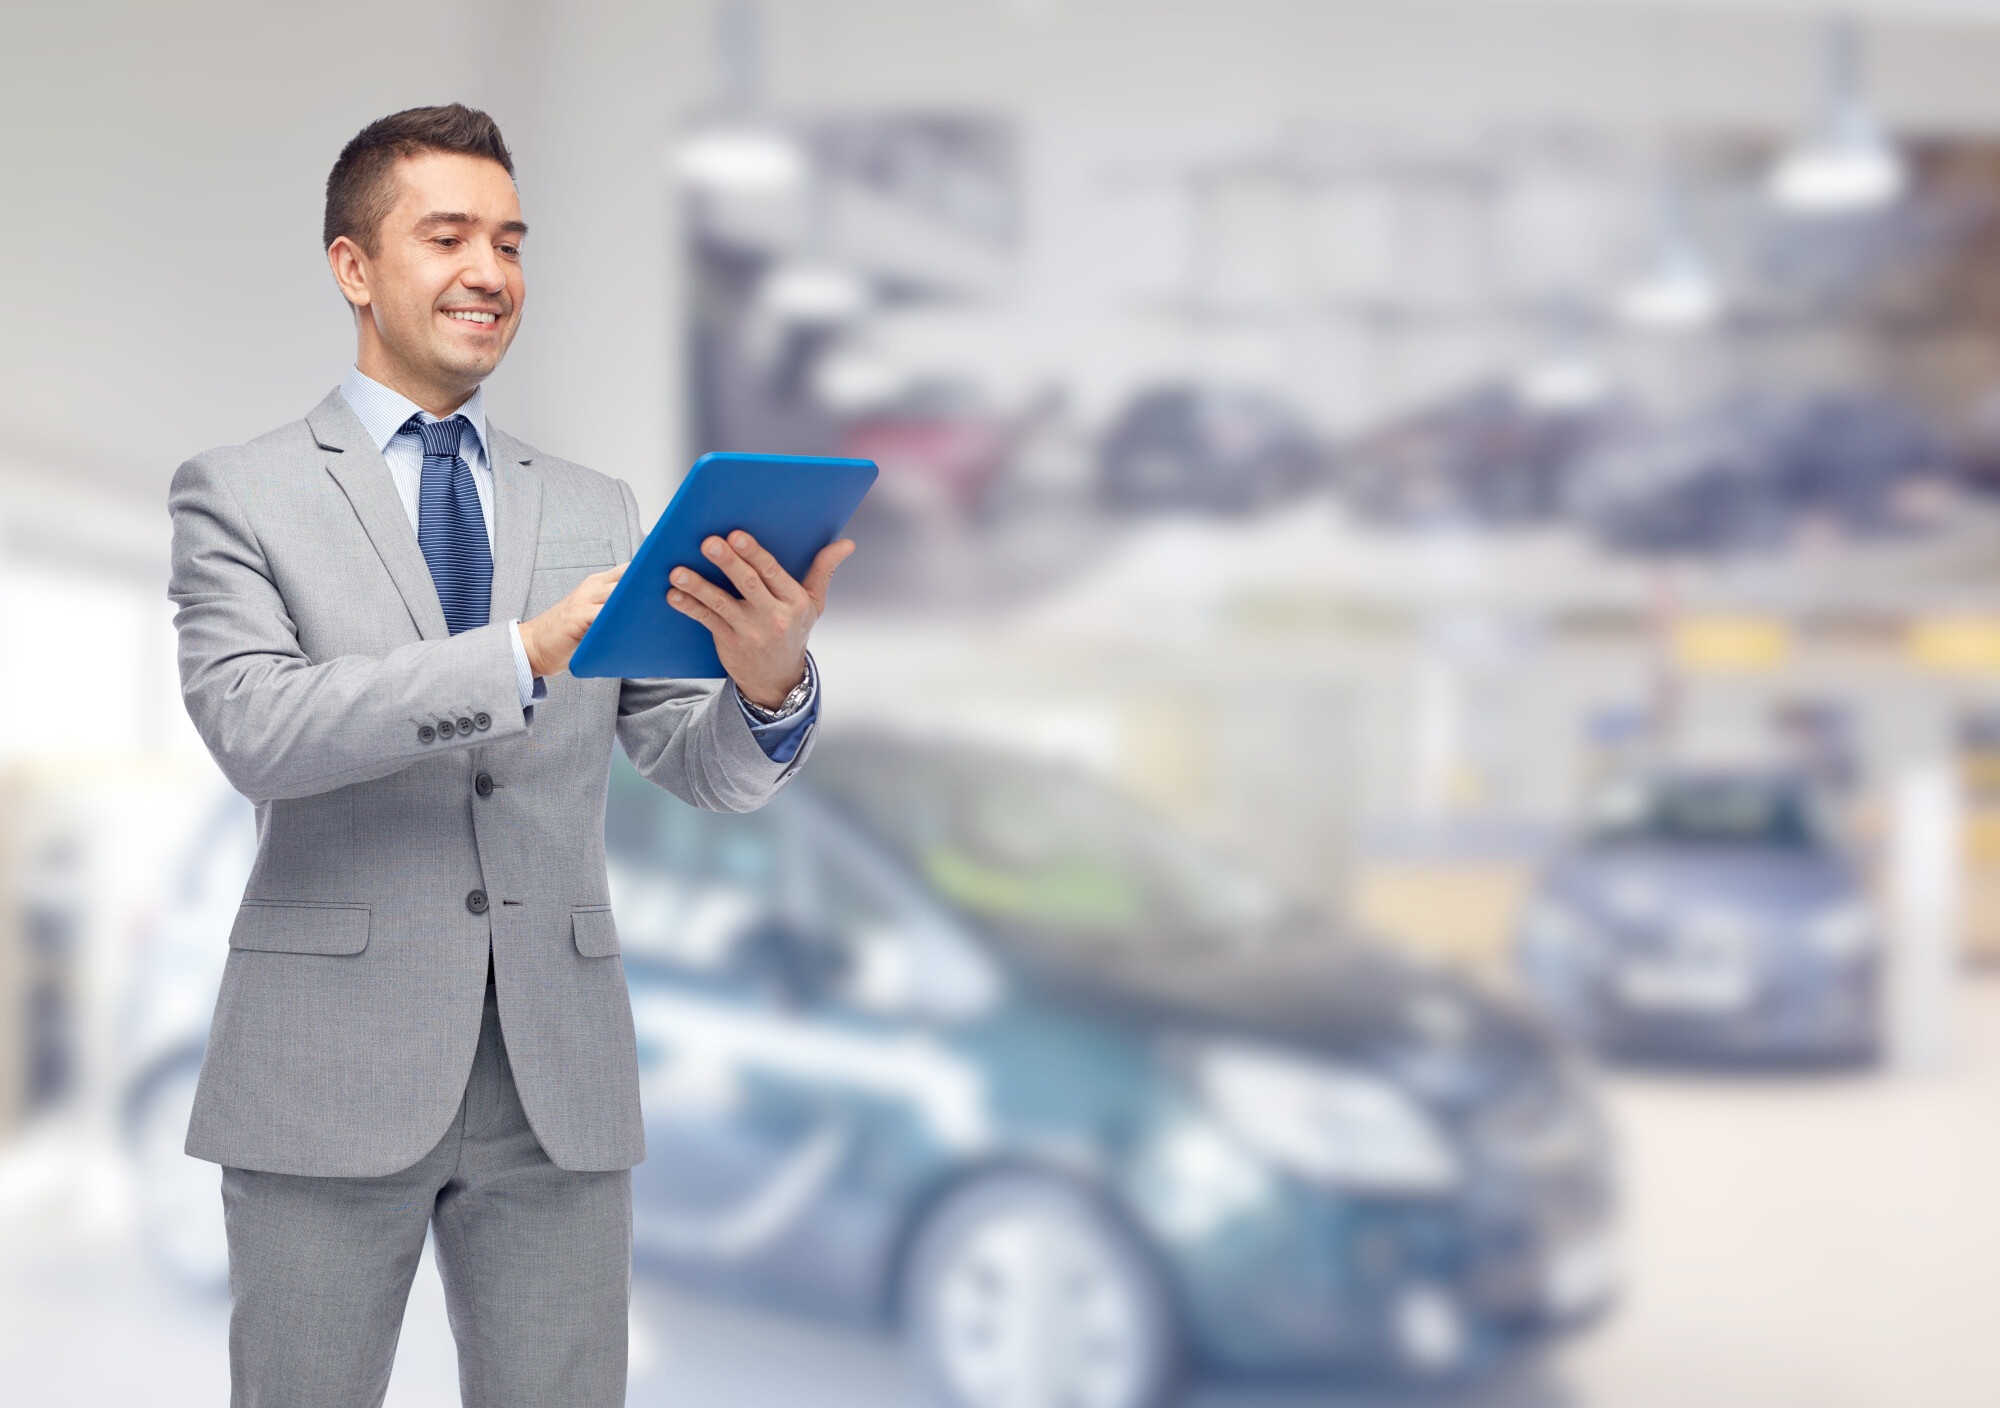 Vroom Car Sales: Things to Know Before Buying or Selling With Vroom image